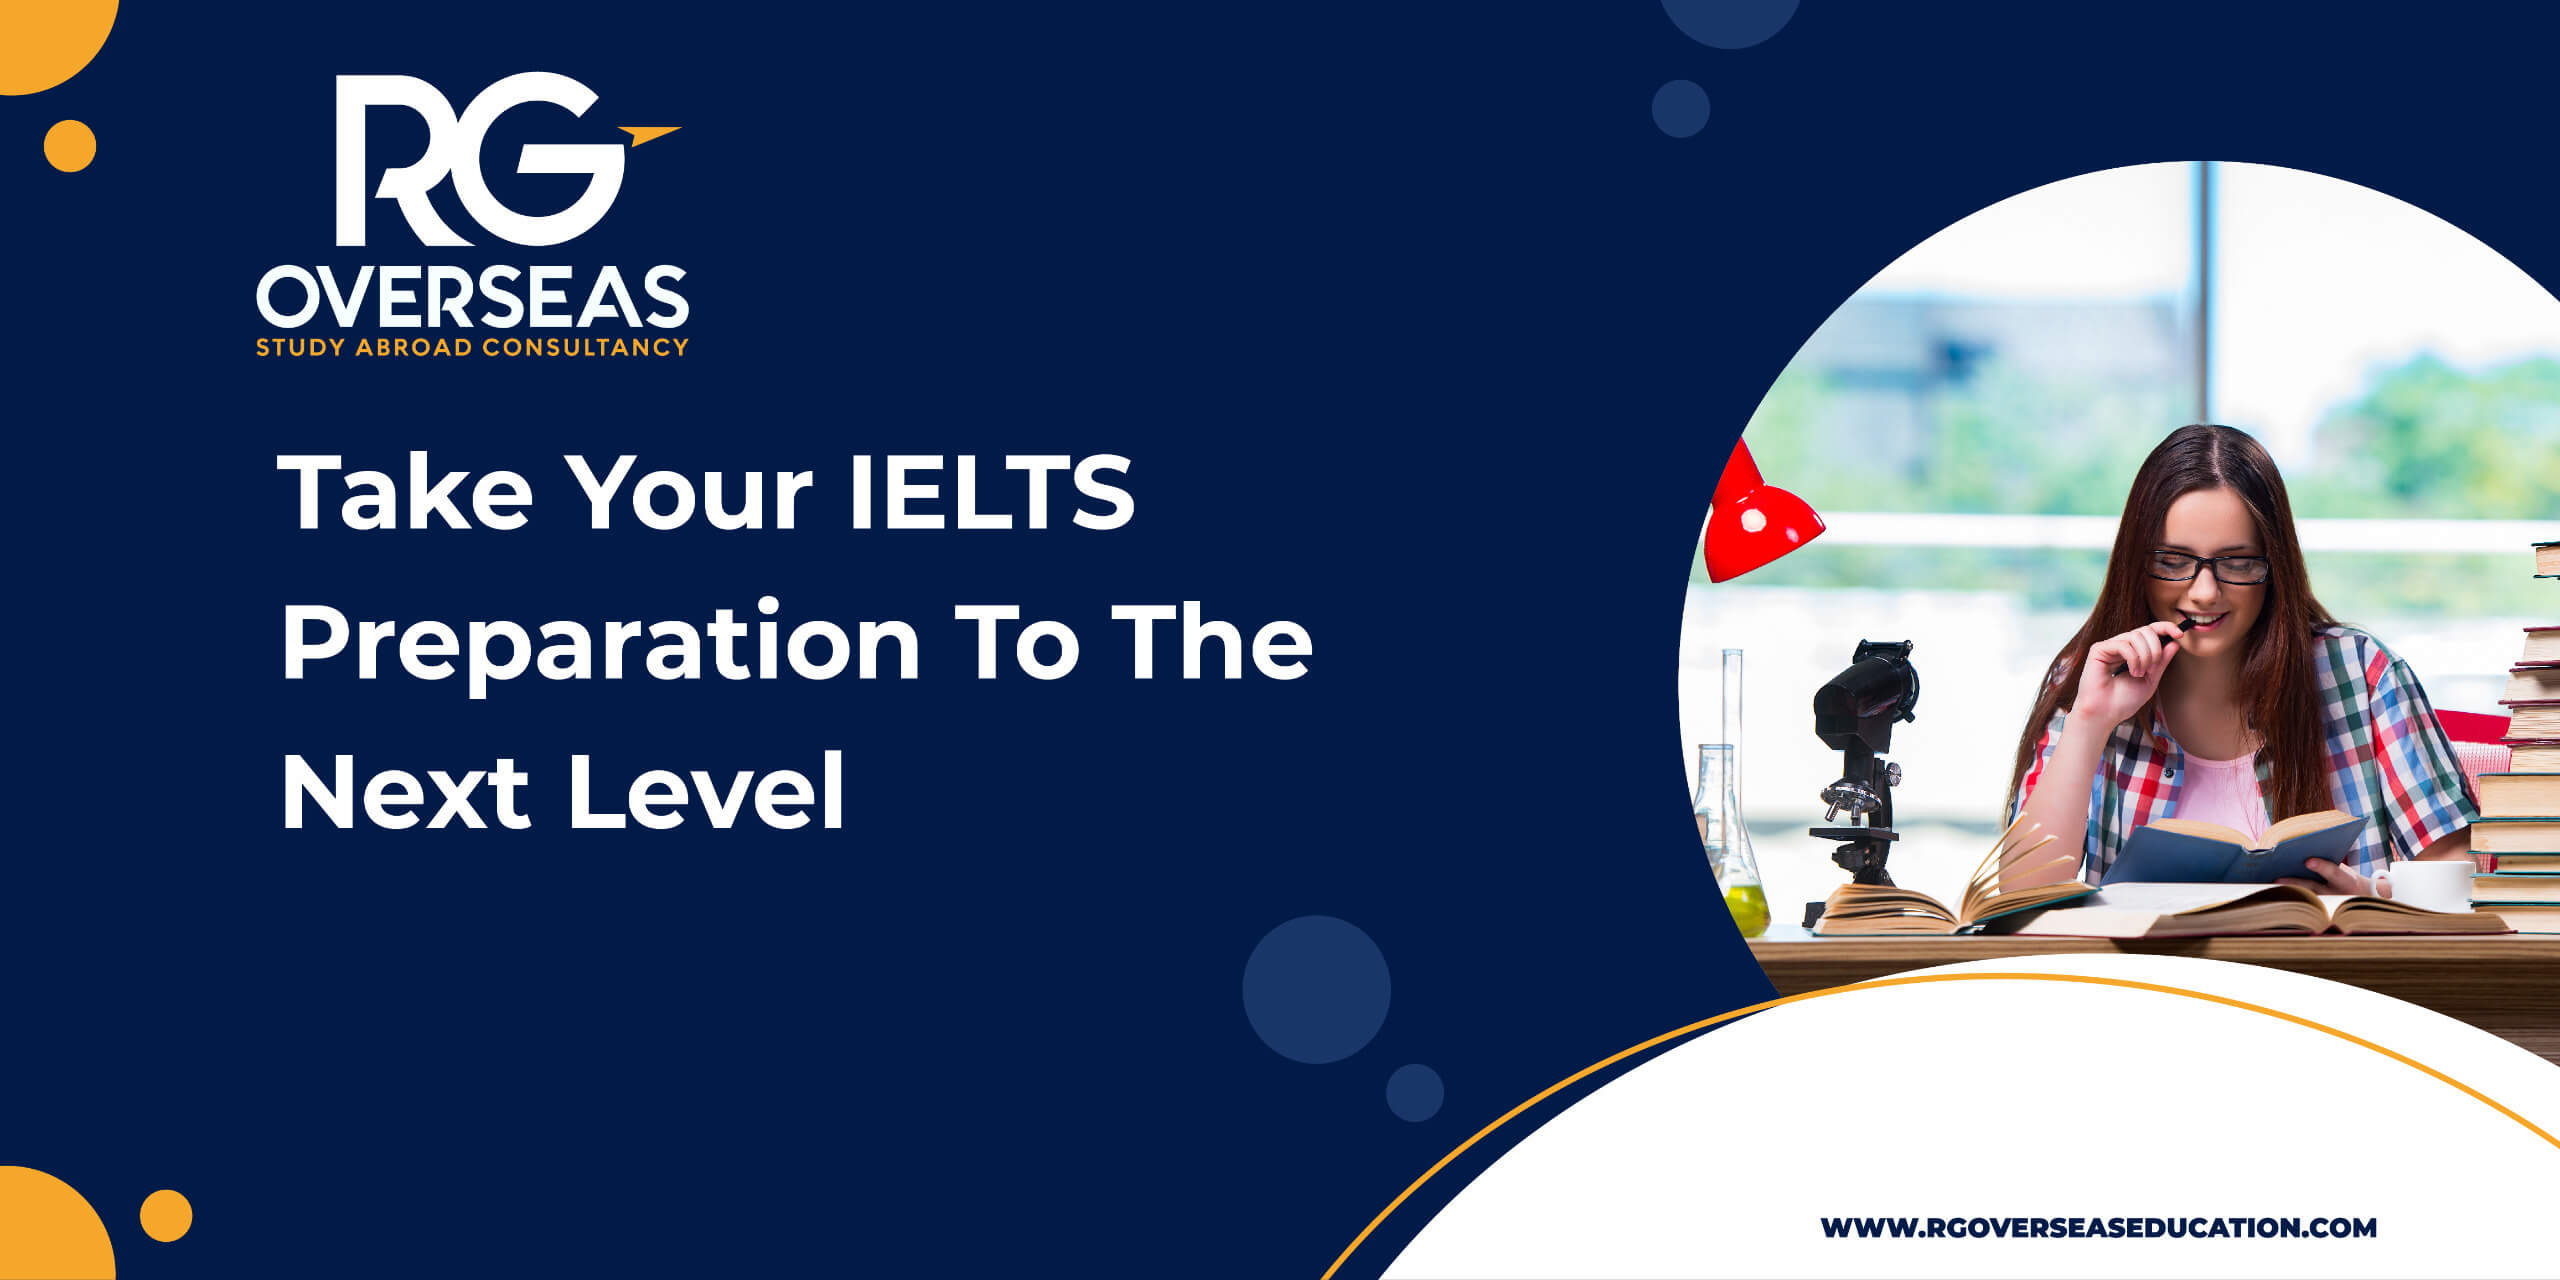 Take Your IELTS Preparation To The Next Level